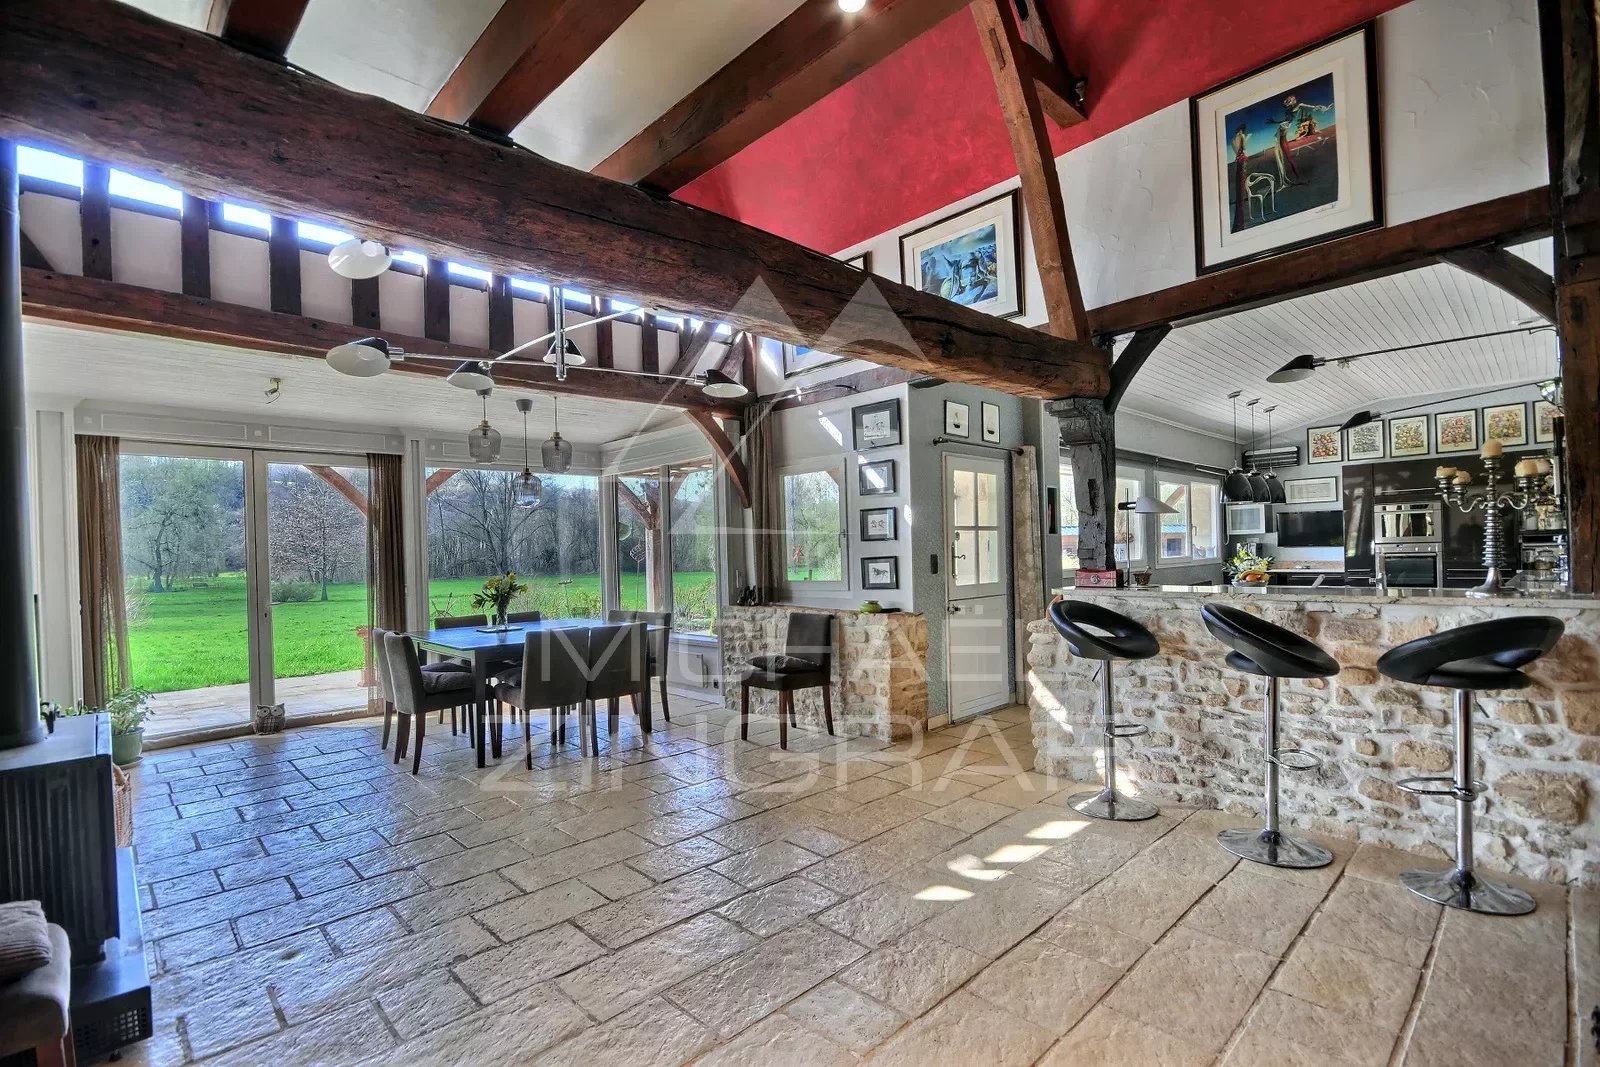 Equestrian property in the Pays d'Auge.